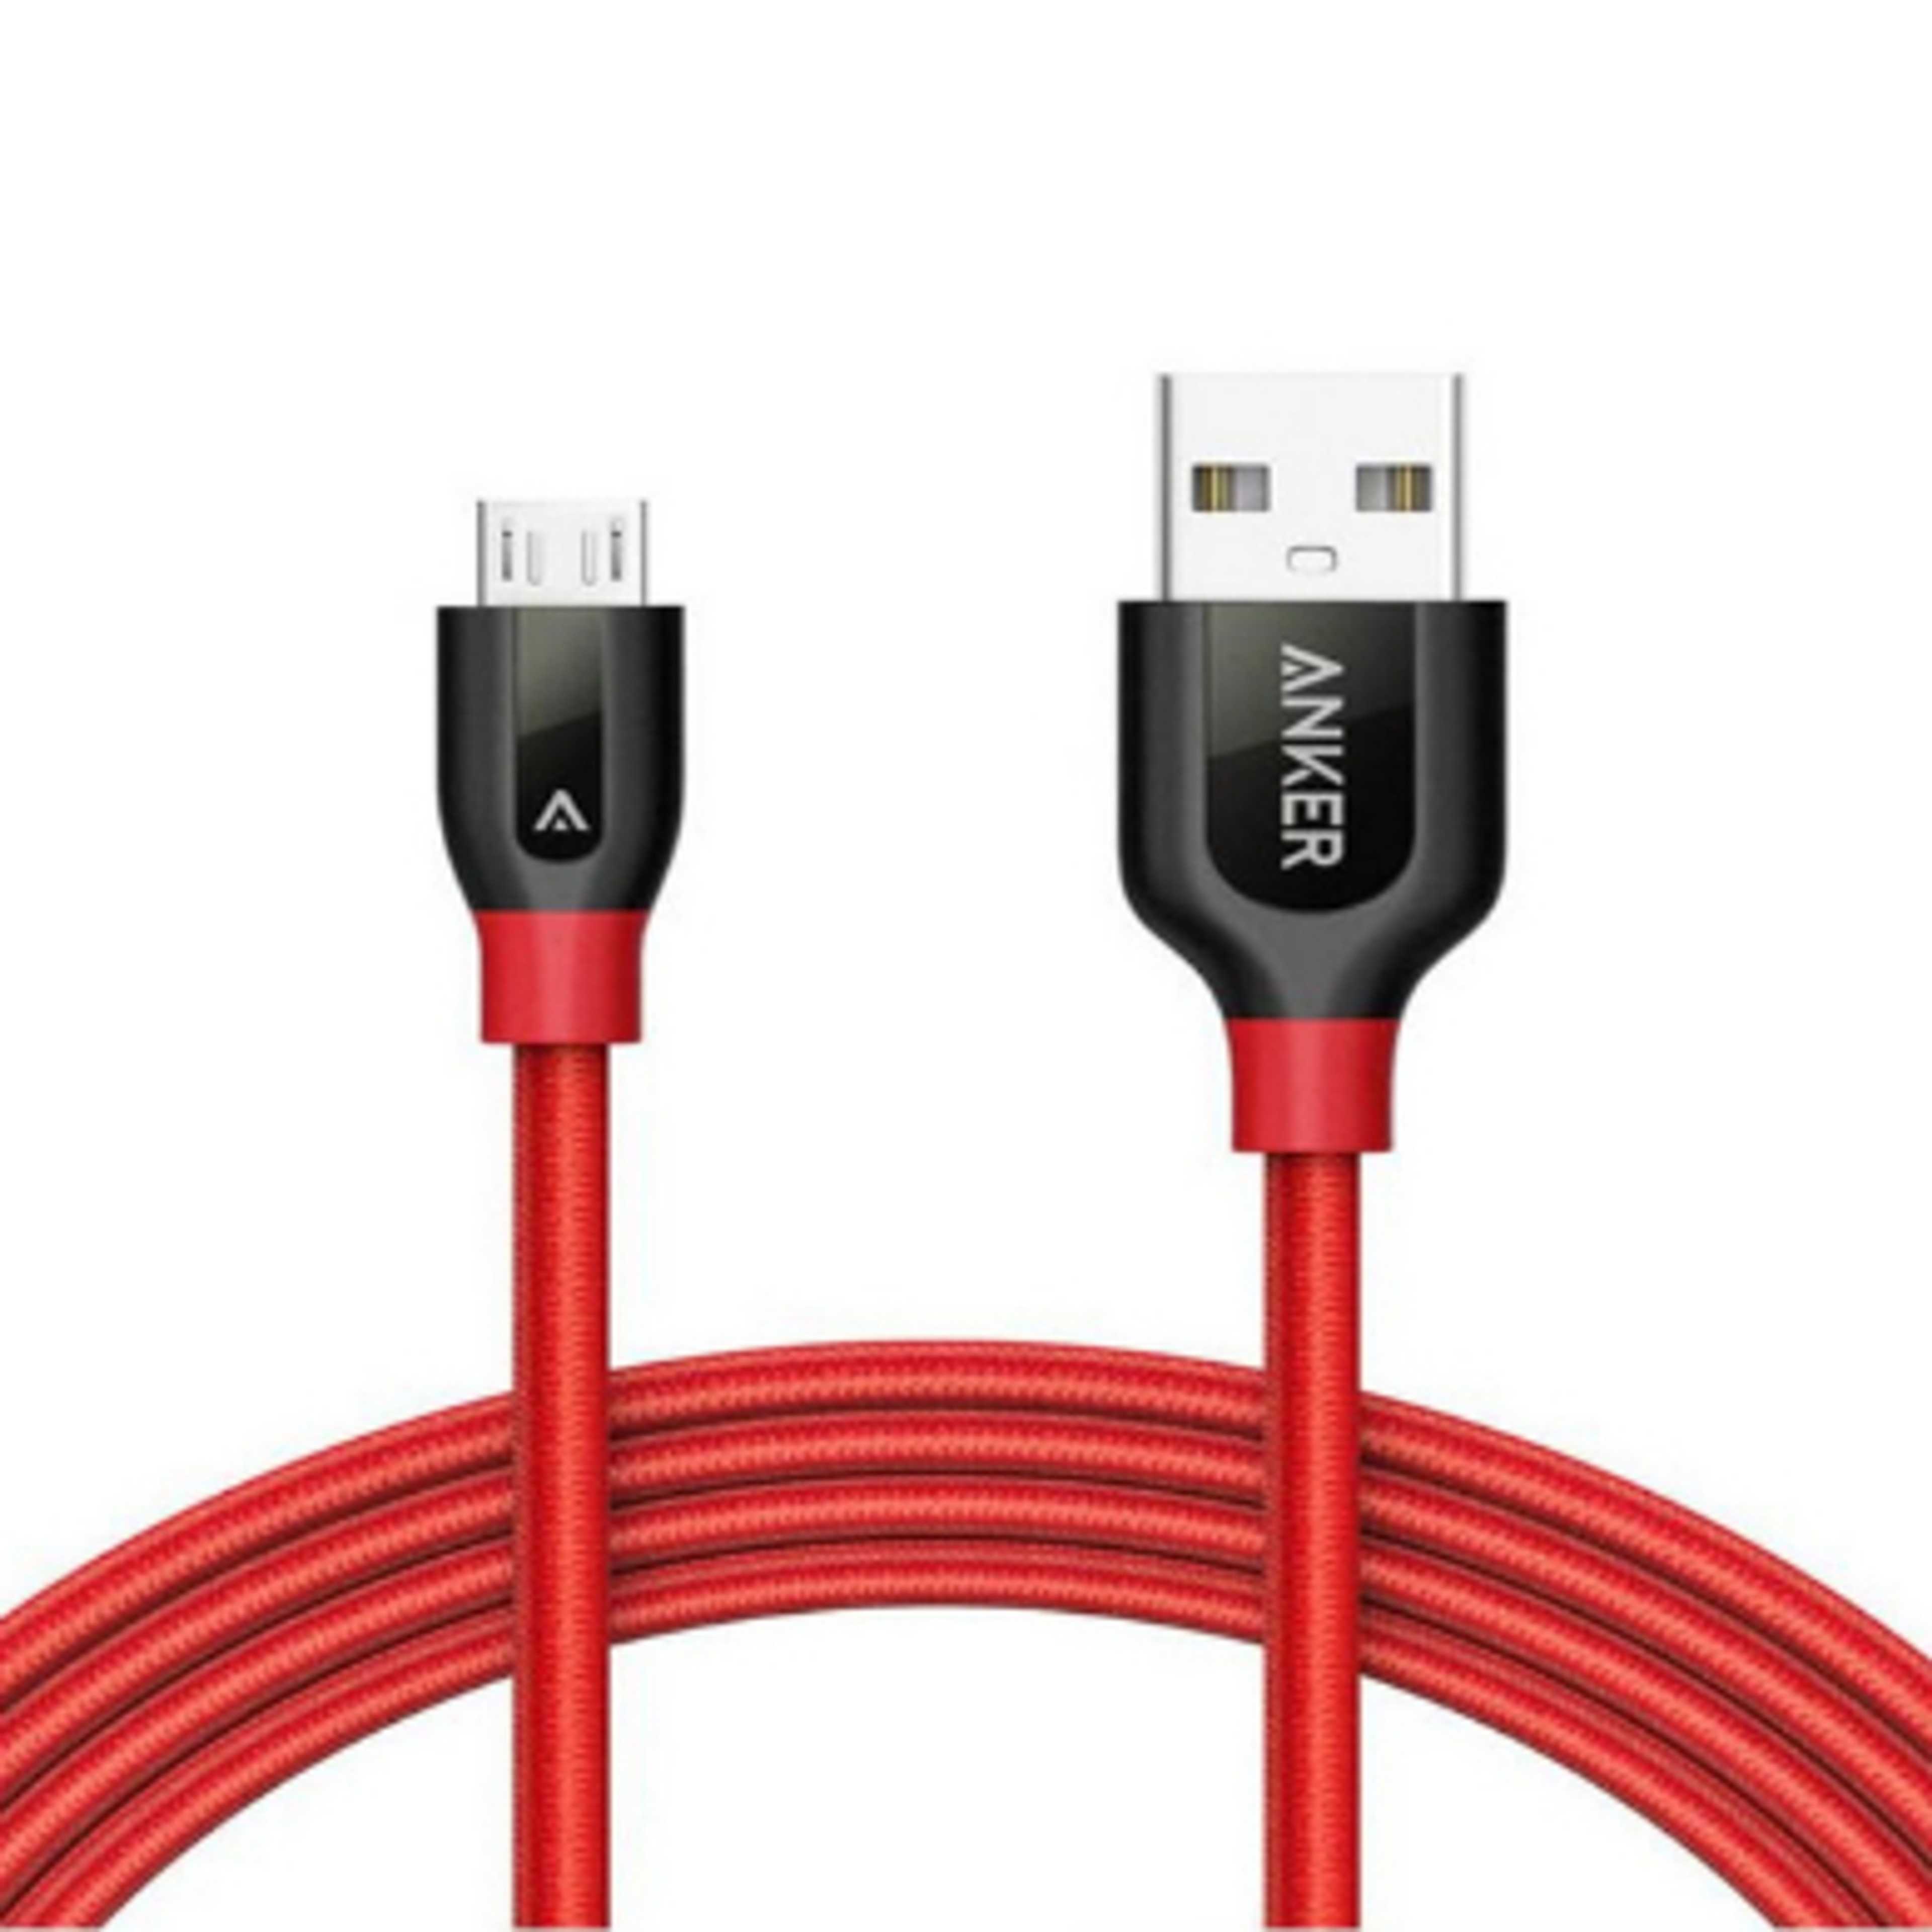 Anker A8143H91- PowerLine+ Micro USB Cable - 6ft